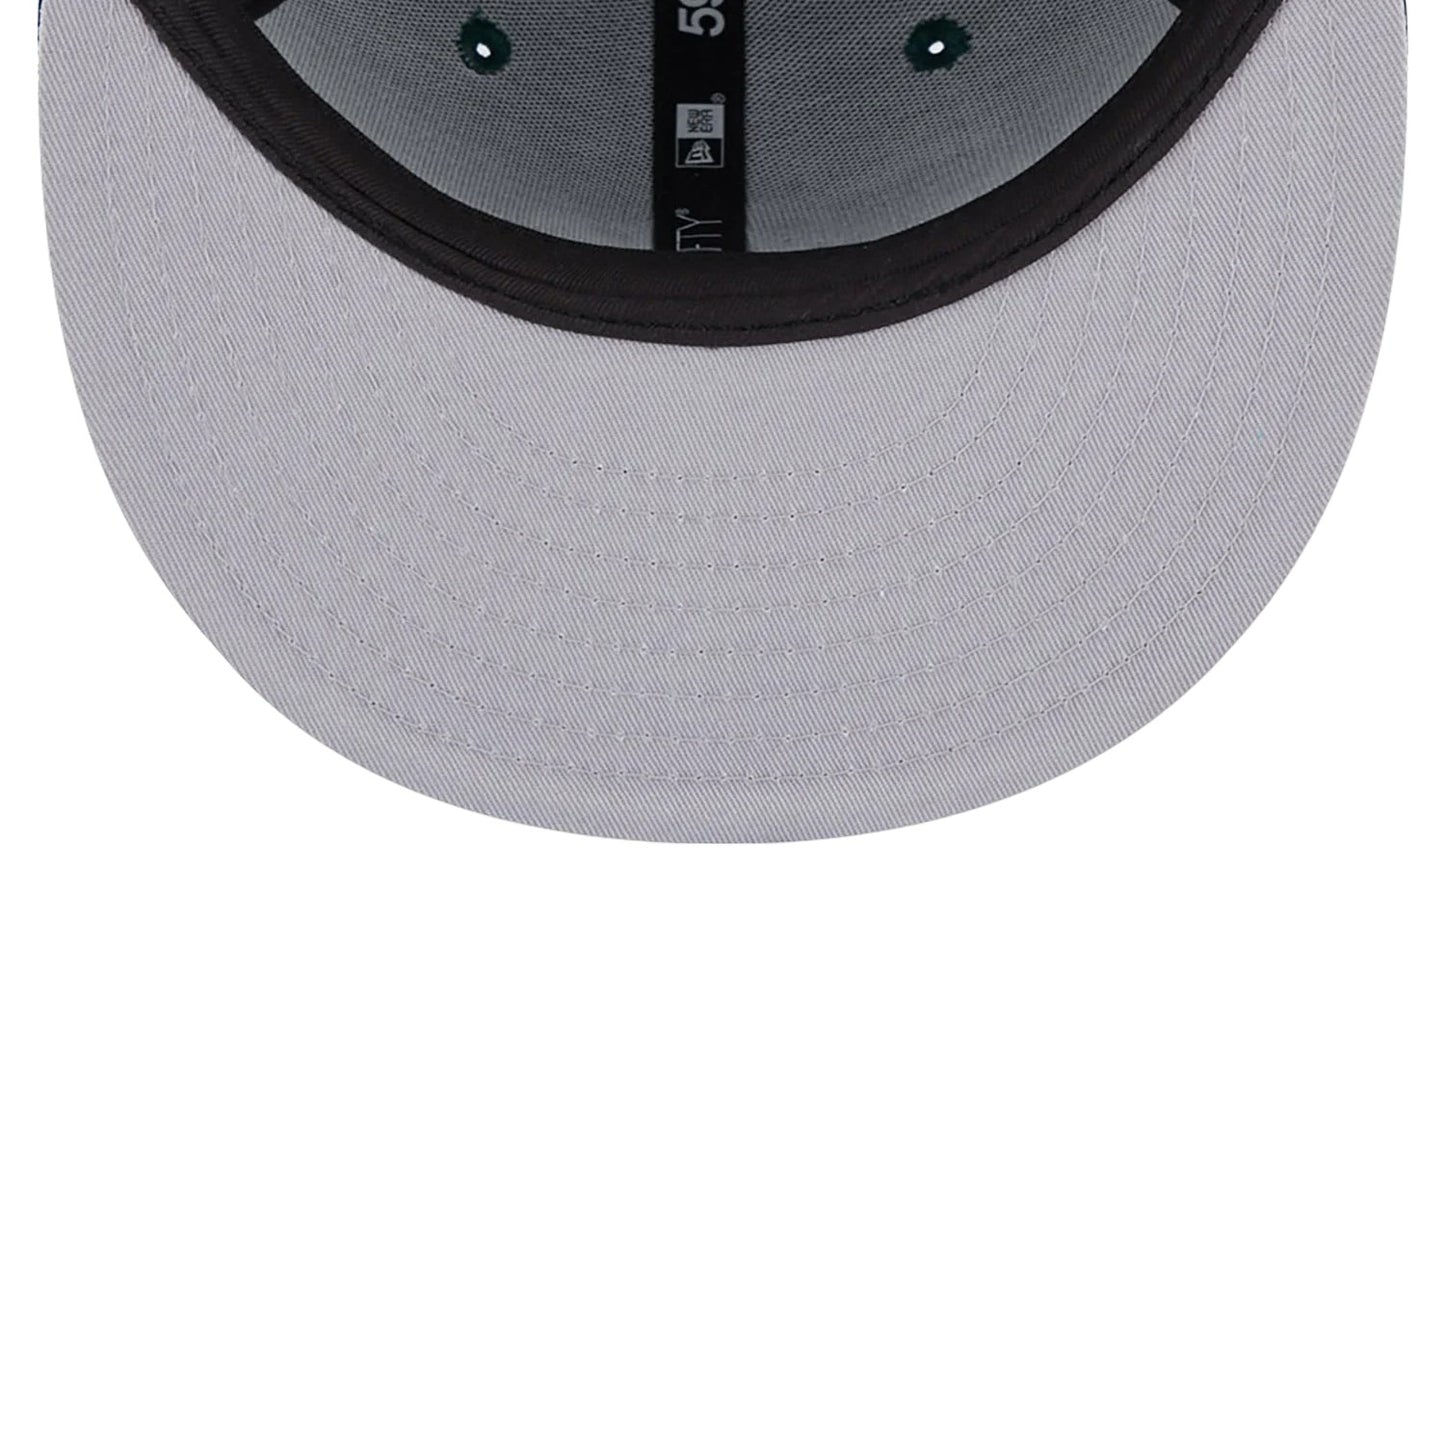 59FIFTY Fitted Oakland Athletics Team Side Patch